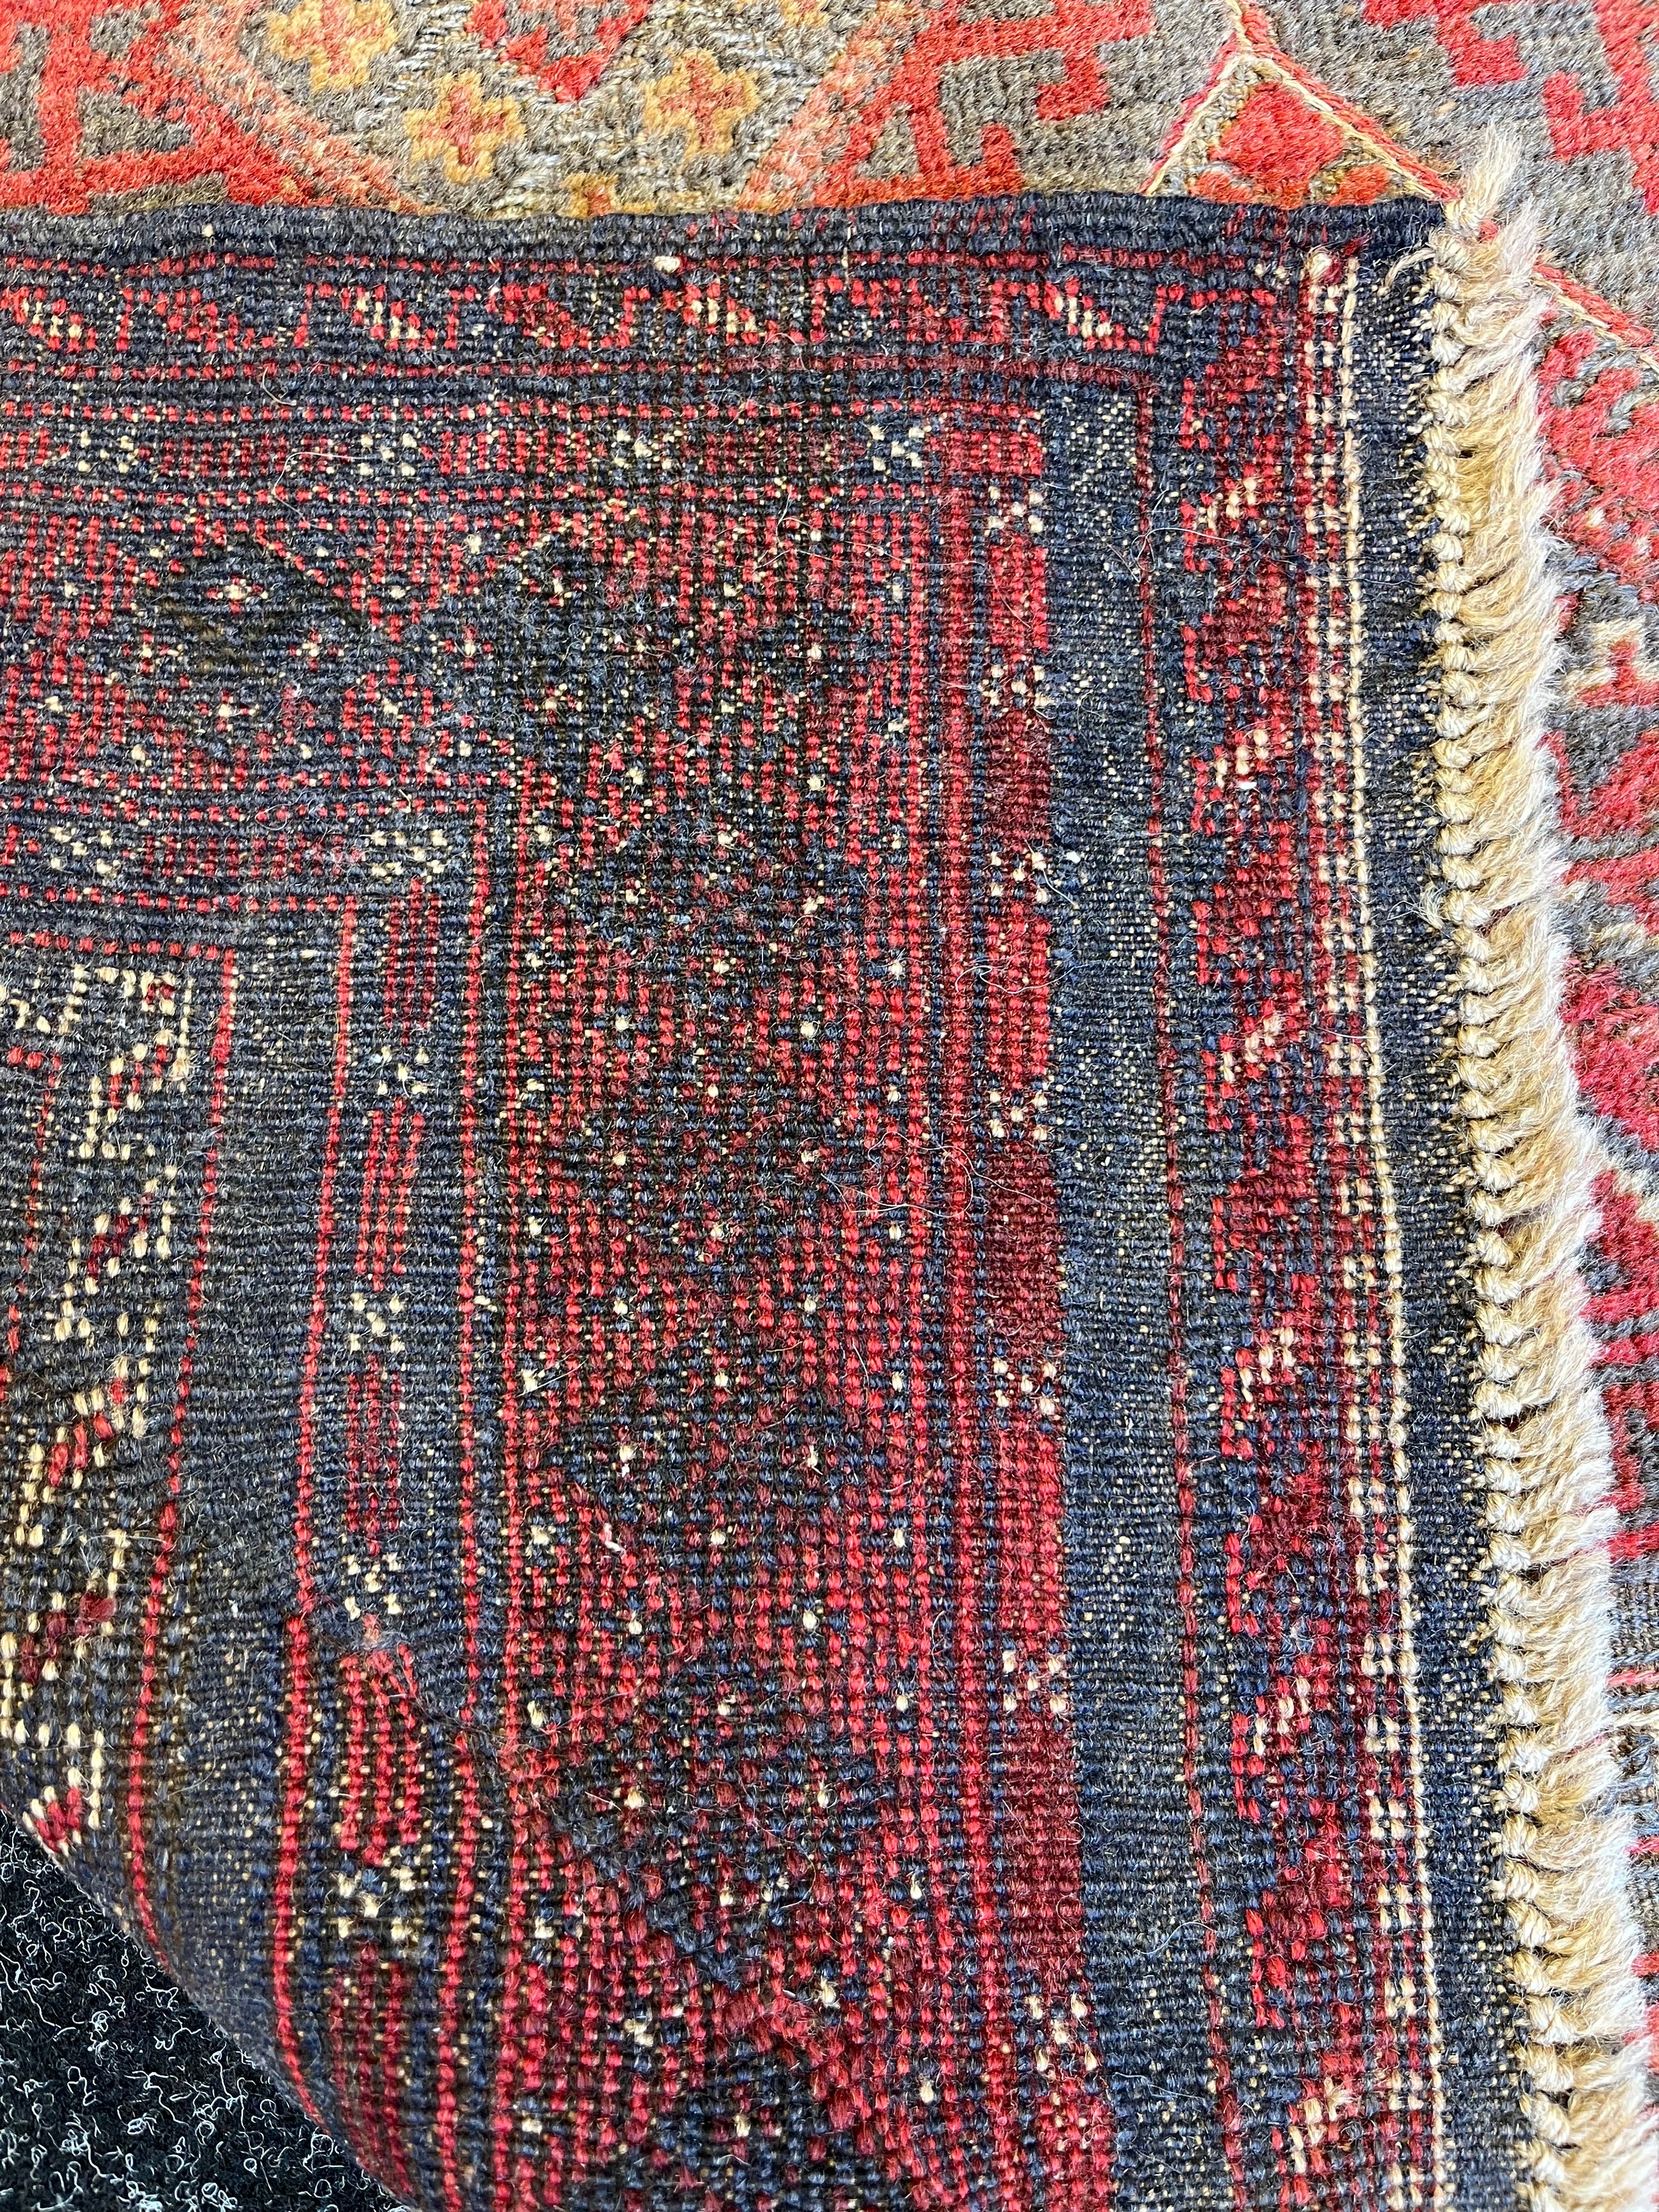 Antique handmade kilm rug, comes with certificate of authenticity [194x121cm] - Image 2 of 7